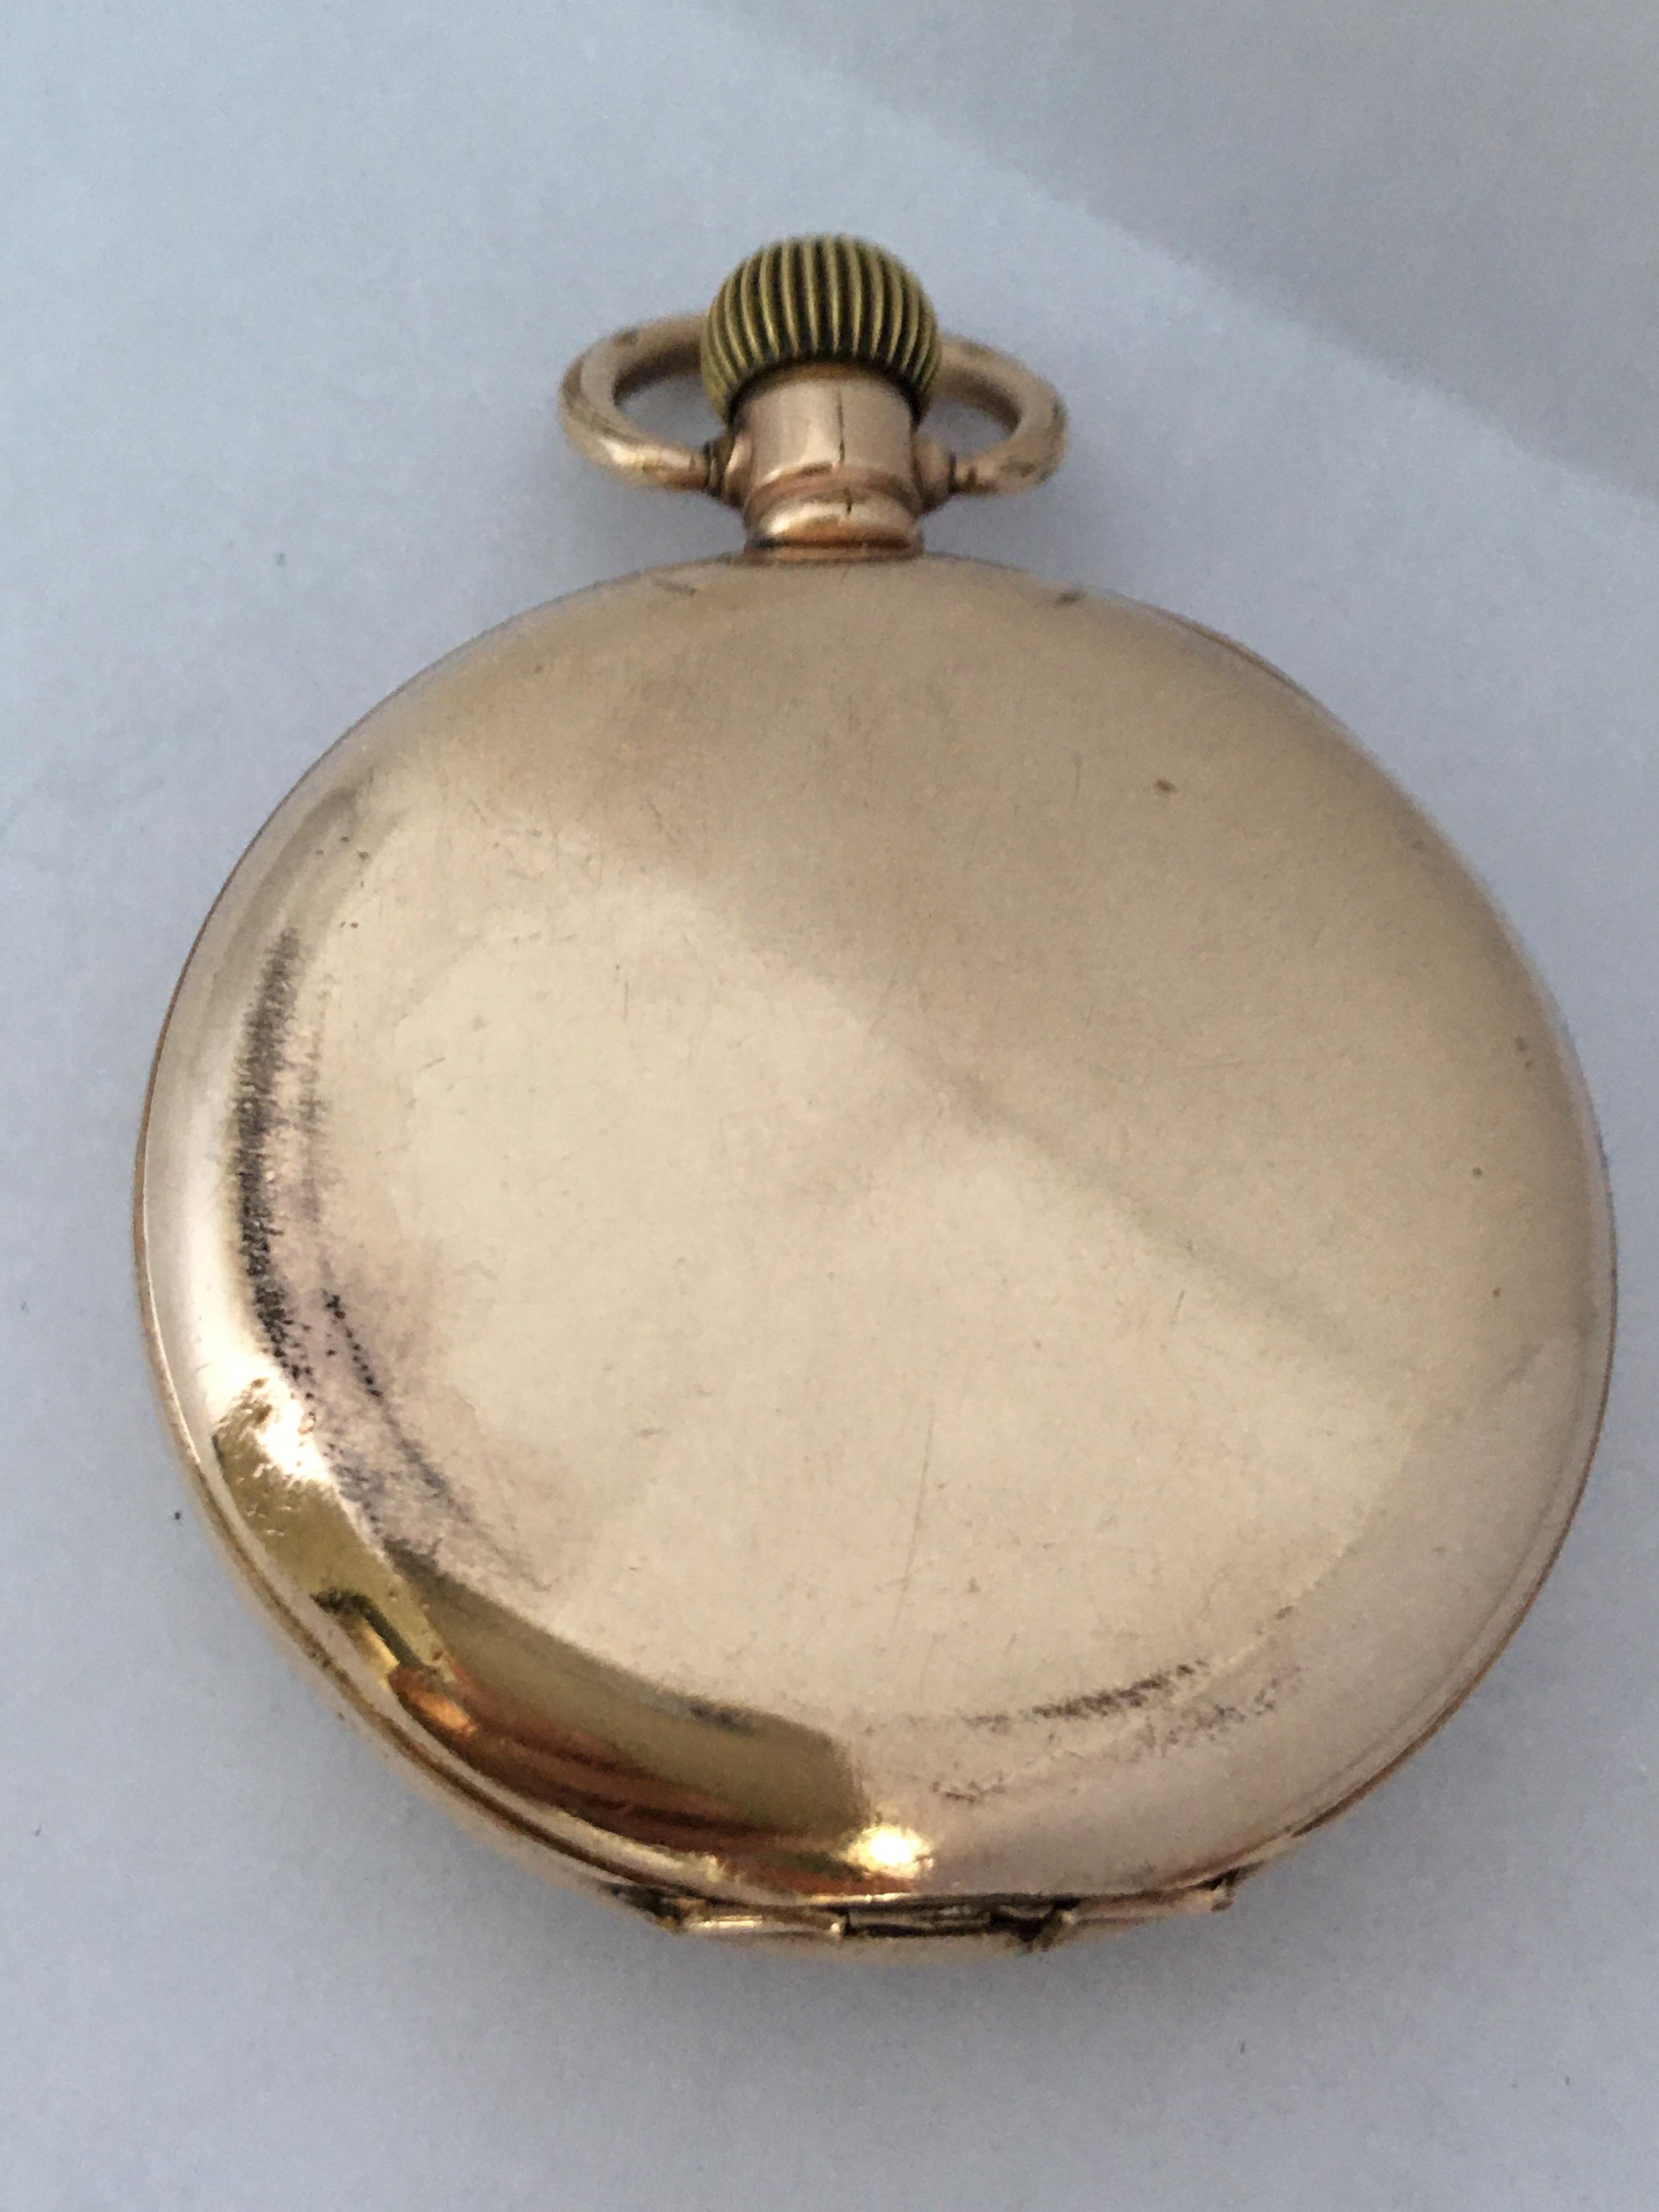 This beautiful 50mm diameter antique gold plated pocket watch is in good working condition and it is running well. Some signs of ageing and wear with tiny and light surface marks on the glass and on the watch case and some tarnished and small dents